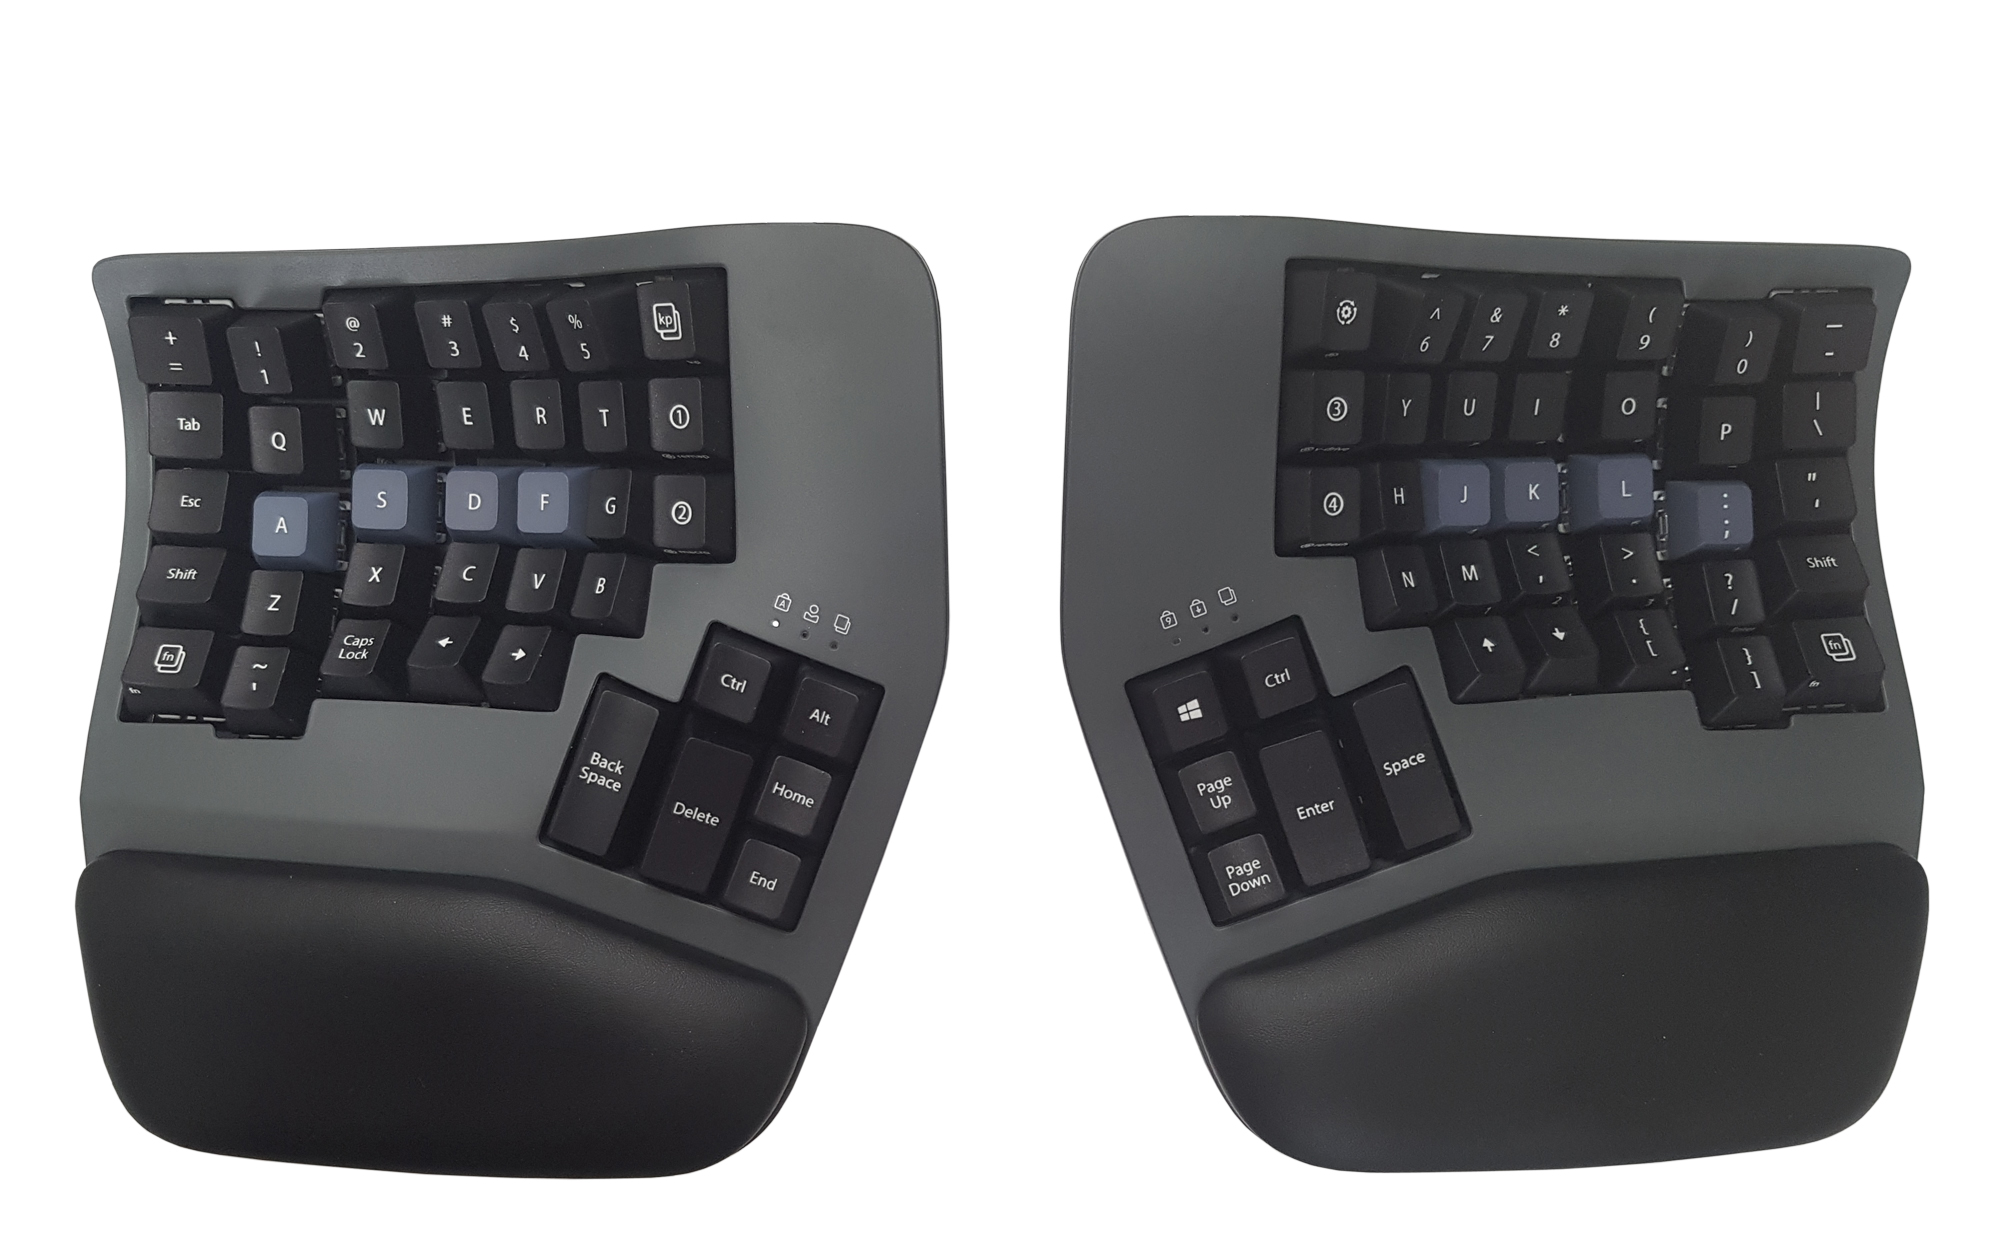 Separate Keyboard Modules for Each Hand